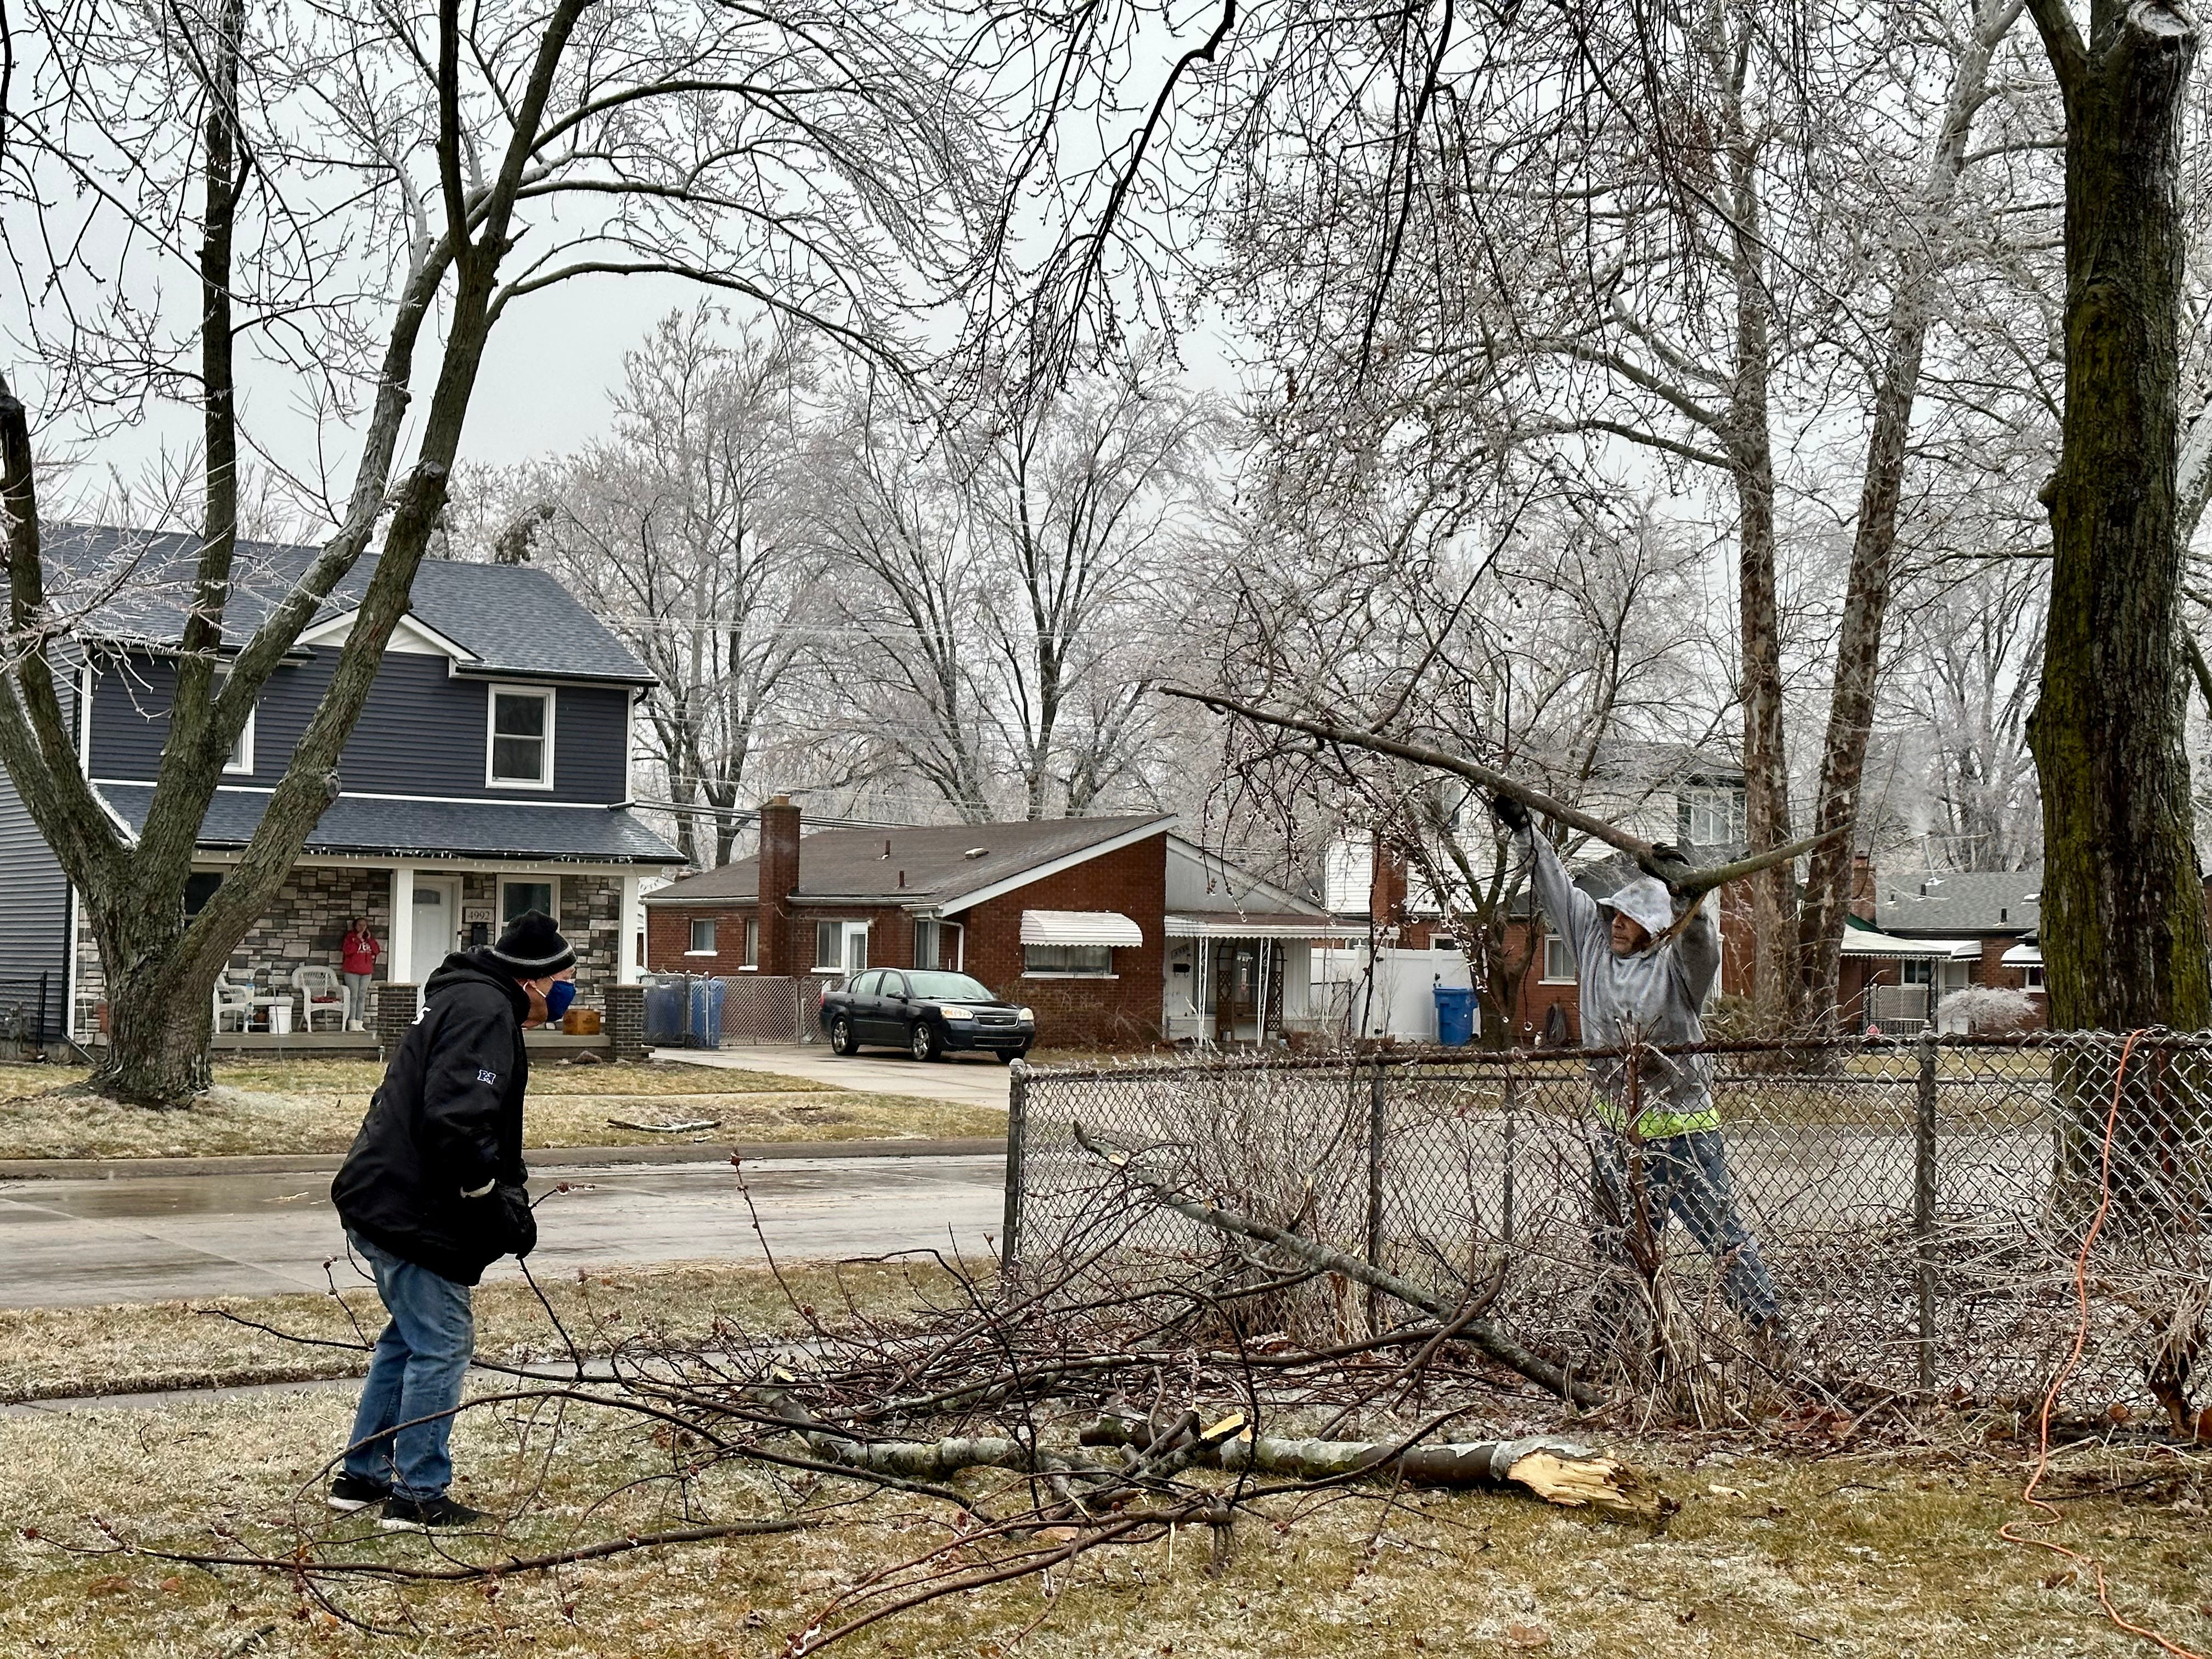 Rich Dennis, 80, left, and an unidentified neighbor who pitched in clean up Dennis' yard after several ice-covered branches crashed down in Dearborn. Rich's wife Barbara Dennis said they attempted to clean up the yard themselves, but the branches were too large, heavy and some not yet fully detached from the tree. Soon enough, their new neighbor assisted with ladders and saws. The Good Samaritan wished to remain unnamed. 
"We didn't expect anyone to help, but this new neighbor kindly offered. We're not used to it because people just don't do that anymore," Barbara Dennis said.